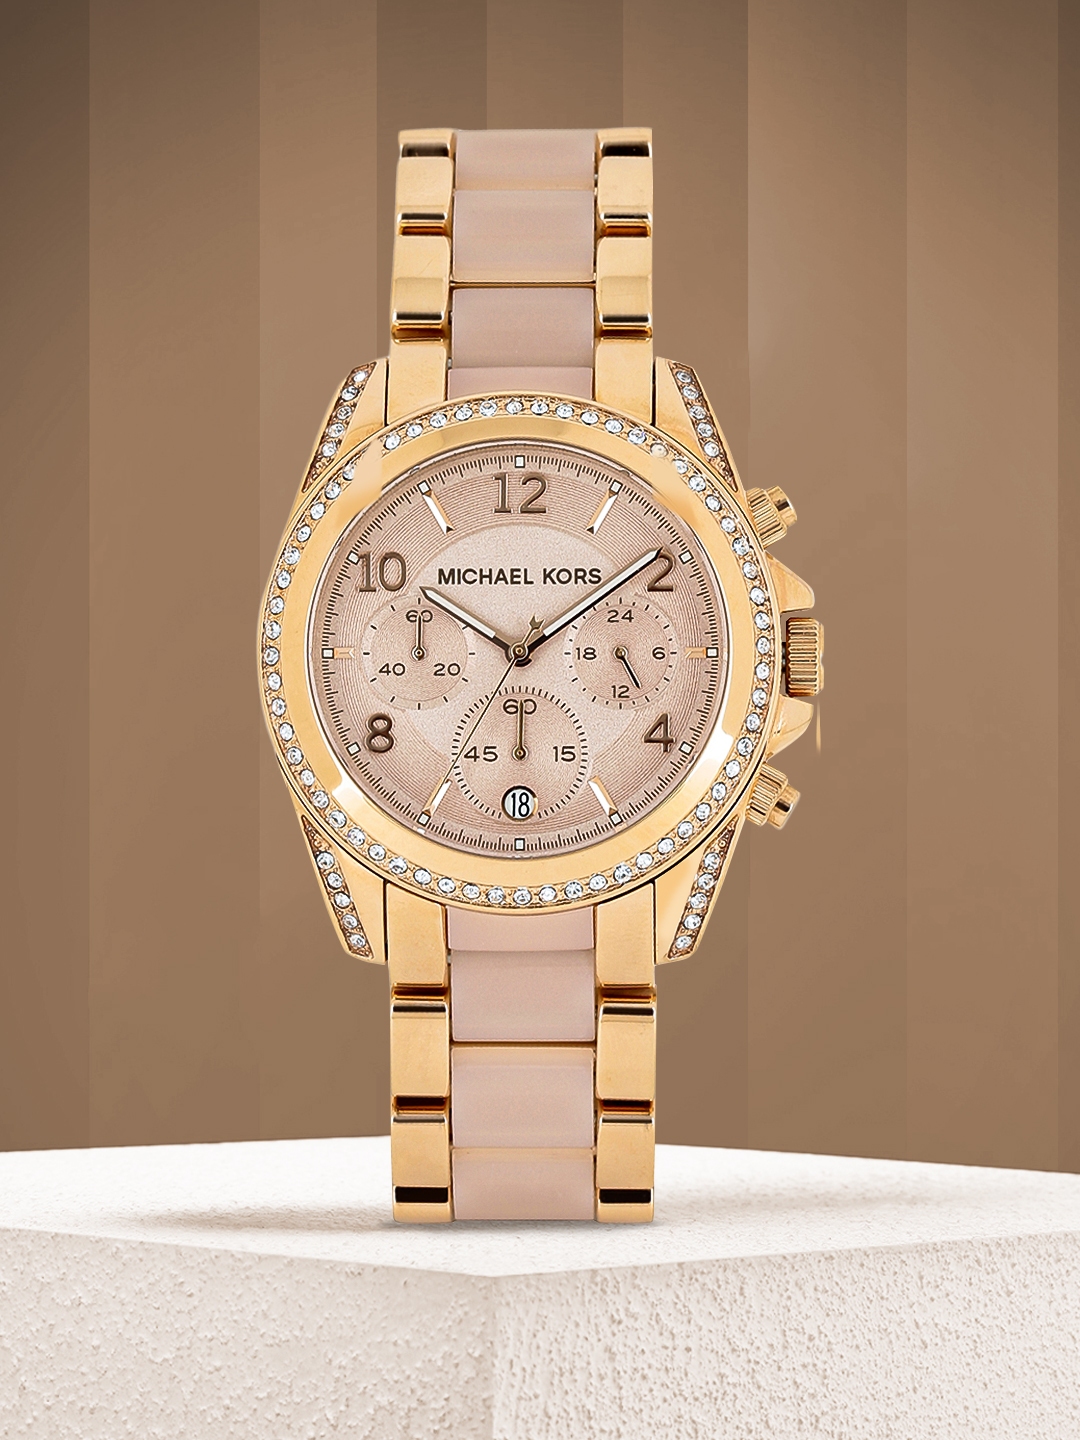 Michael Kors new smartwatches ups your wellness game glamorously